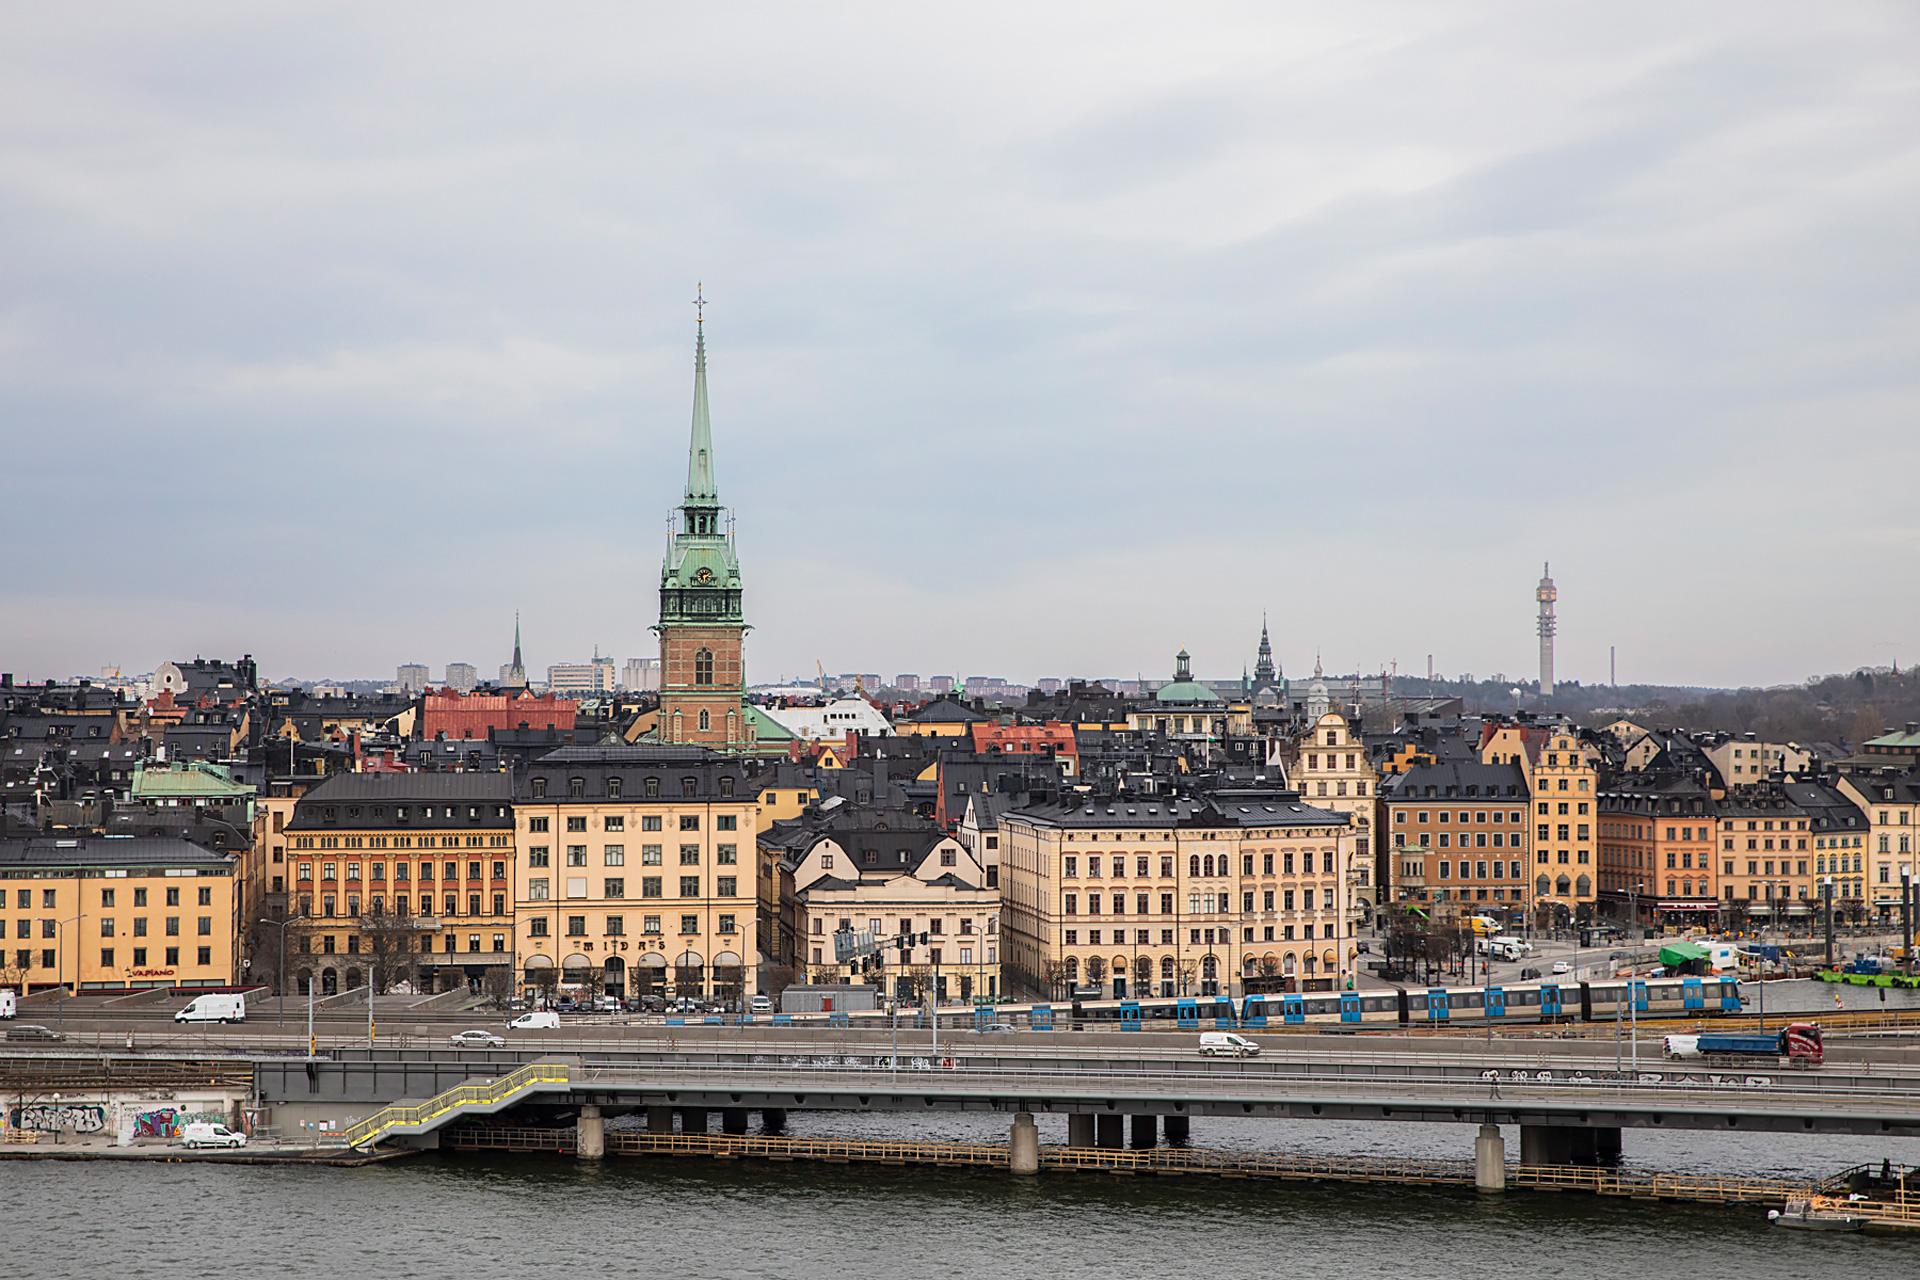 Train with live IoT data in Stockholm